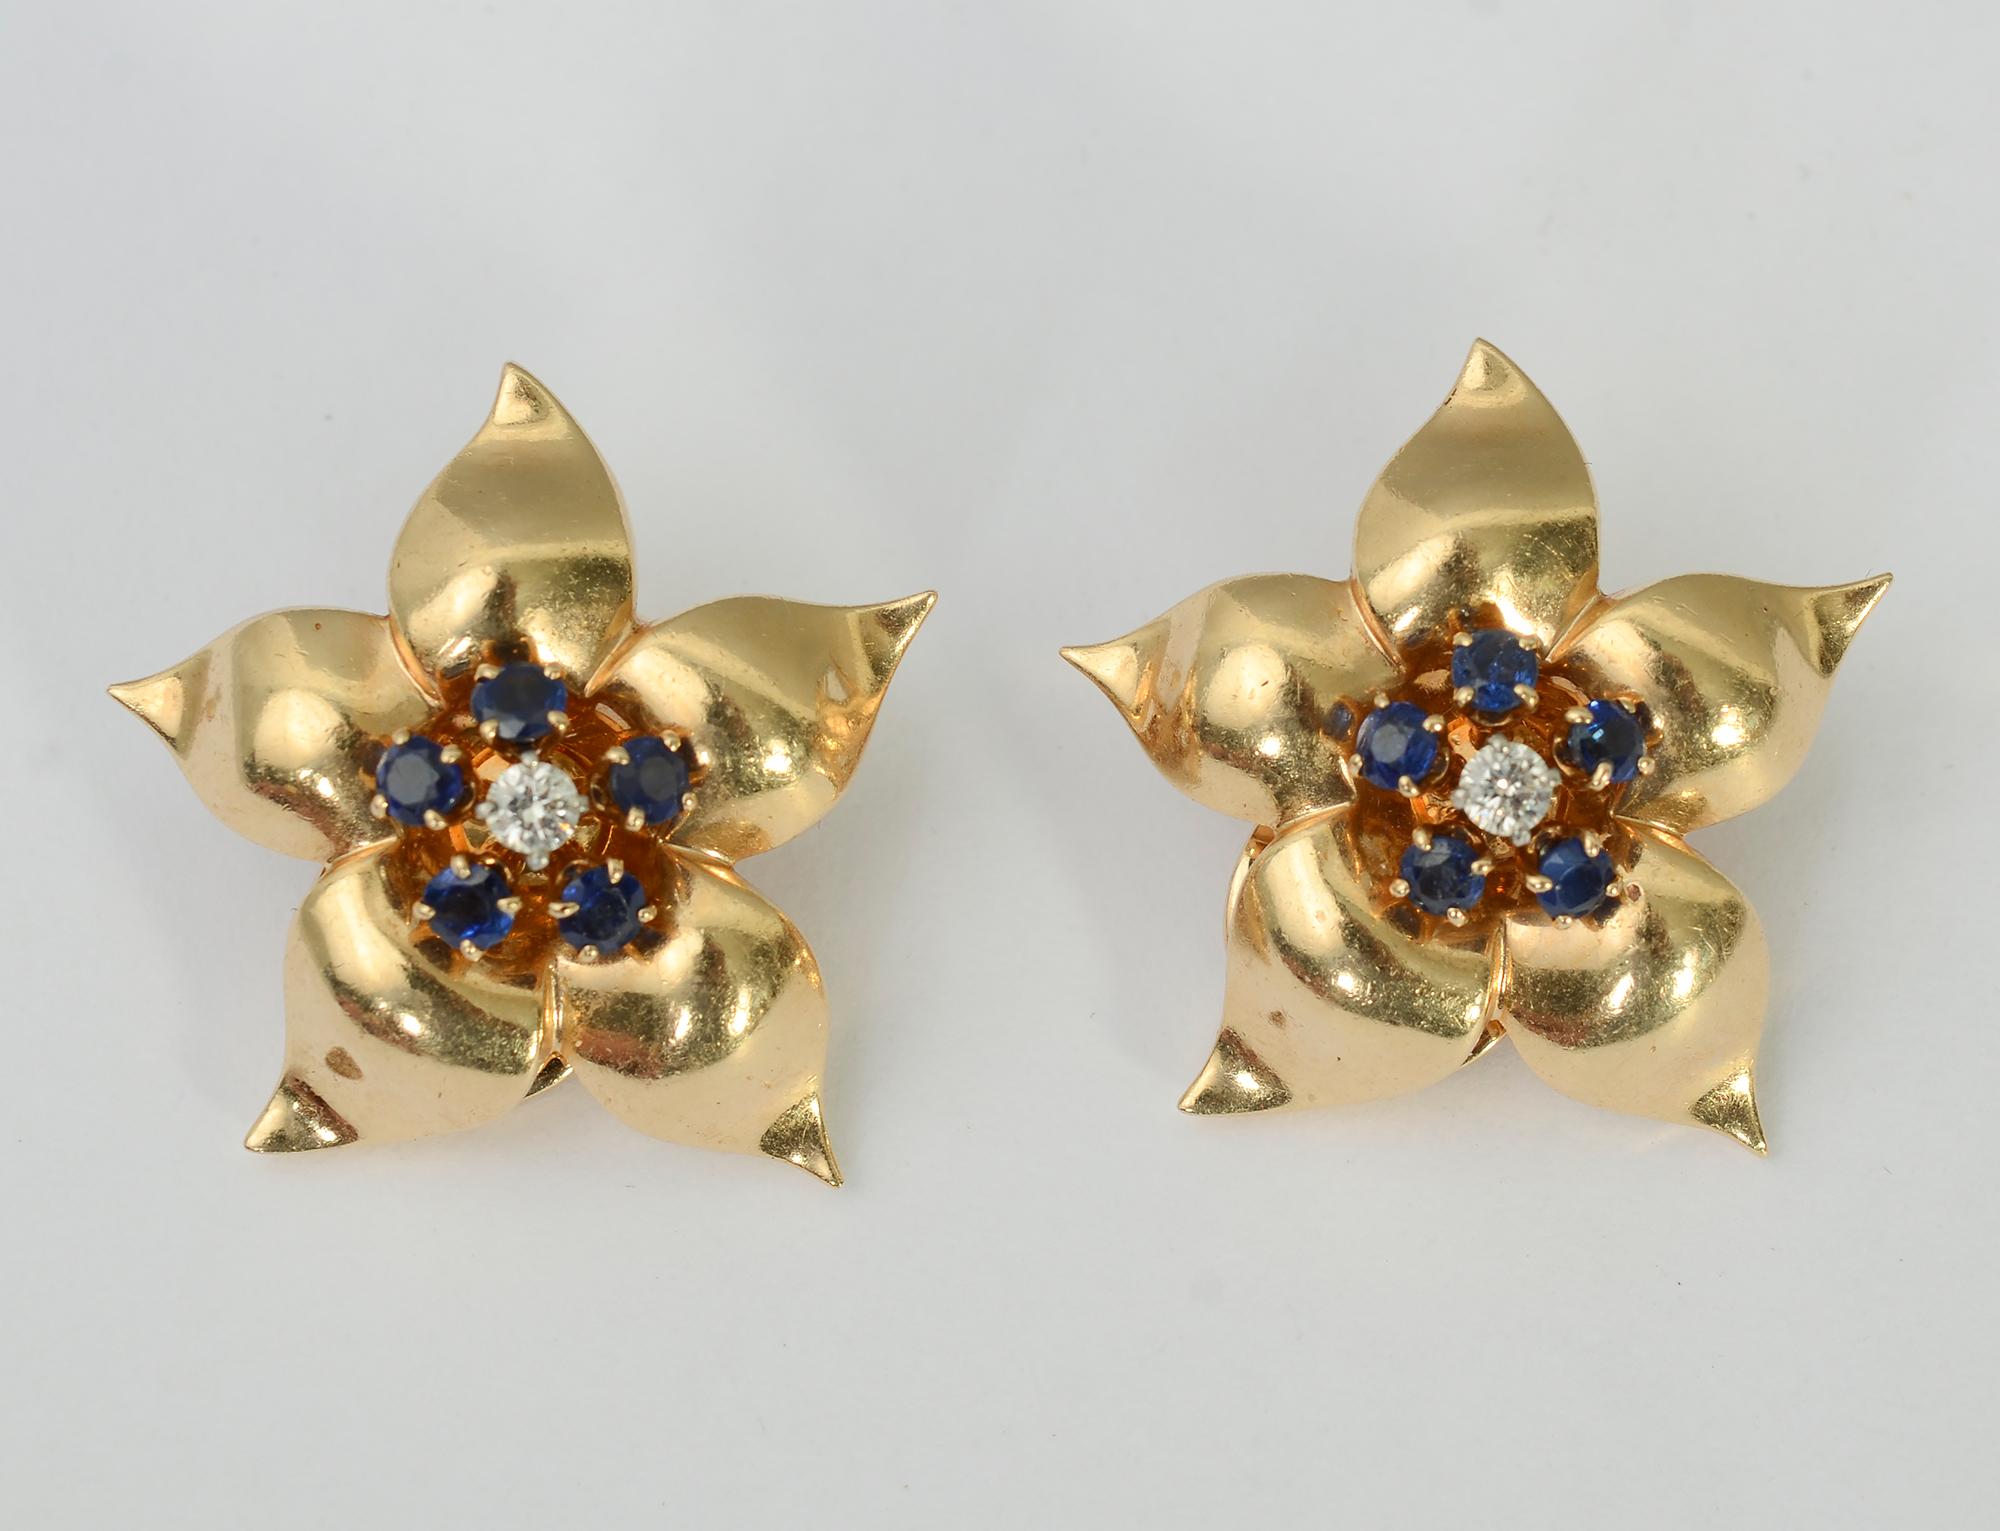 Lovely star-like flower earrings with great form and dimensionality. They are centered with a diamond around which are five sapphires. Clip backs can be converted to posts.